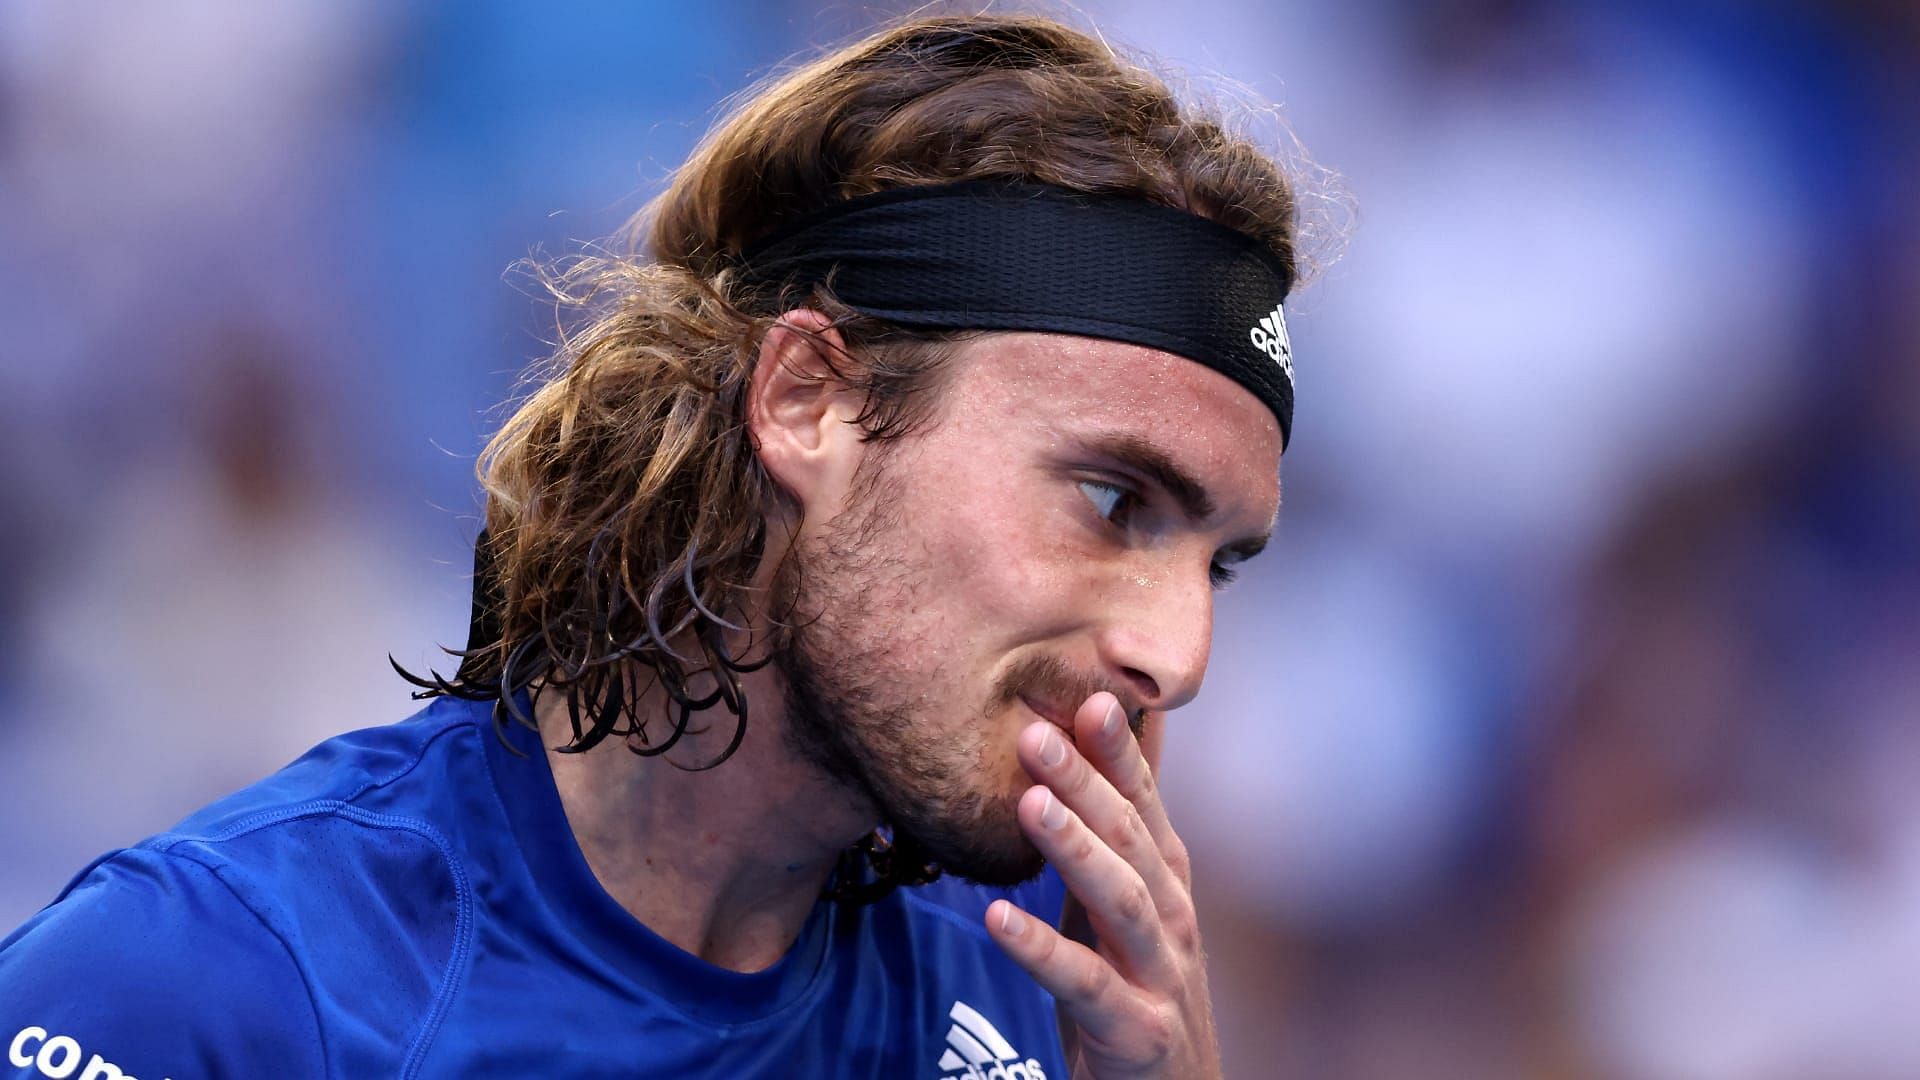 Tennis fans have hit out at Stefanos Tsitsipas